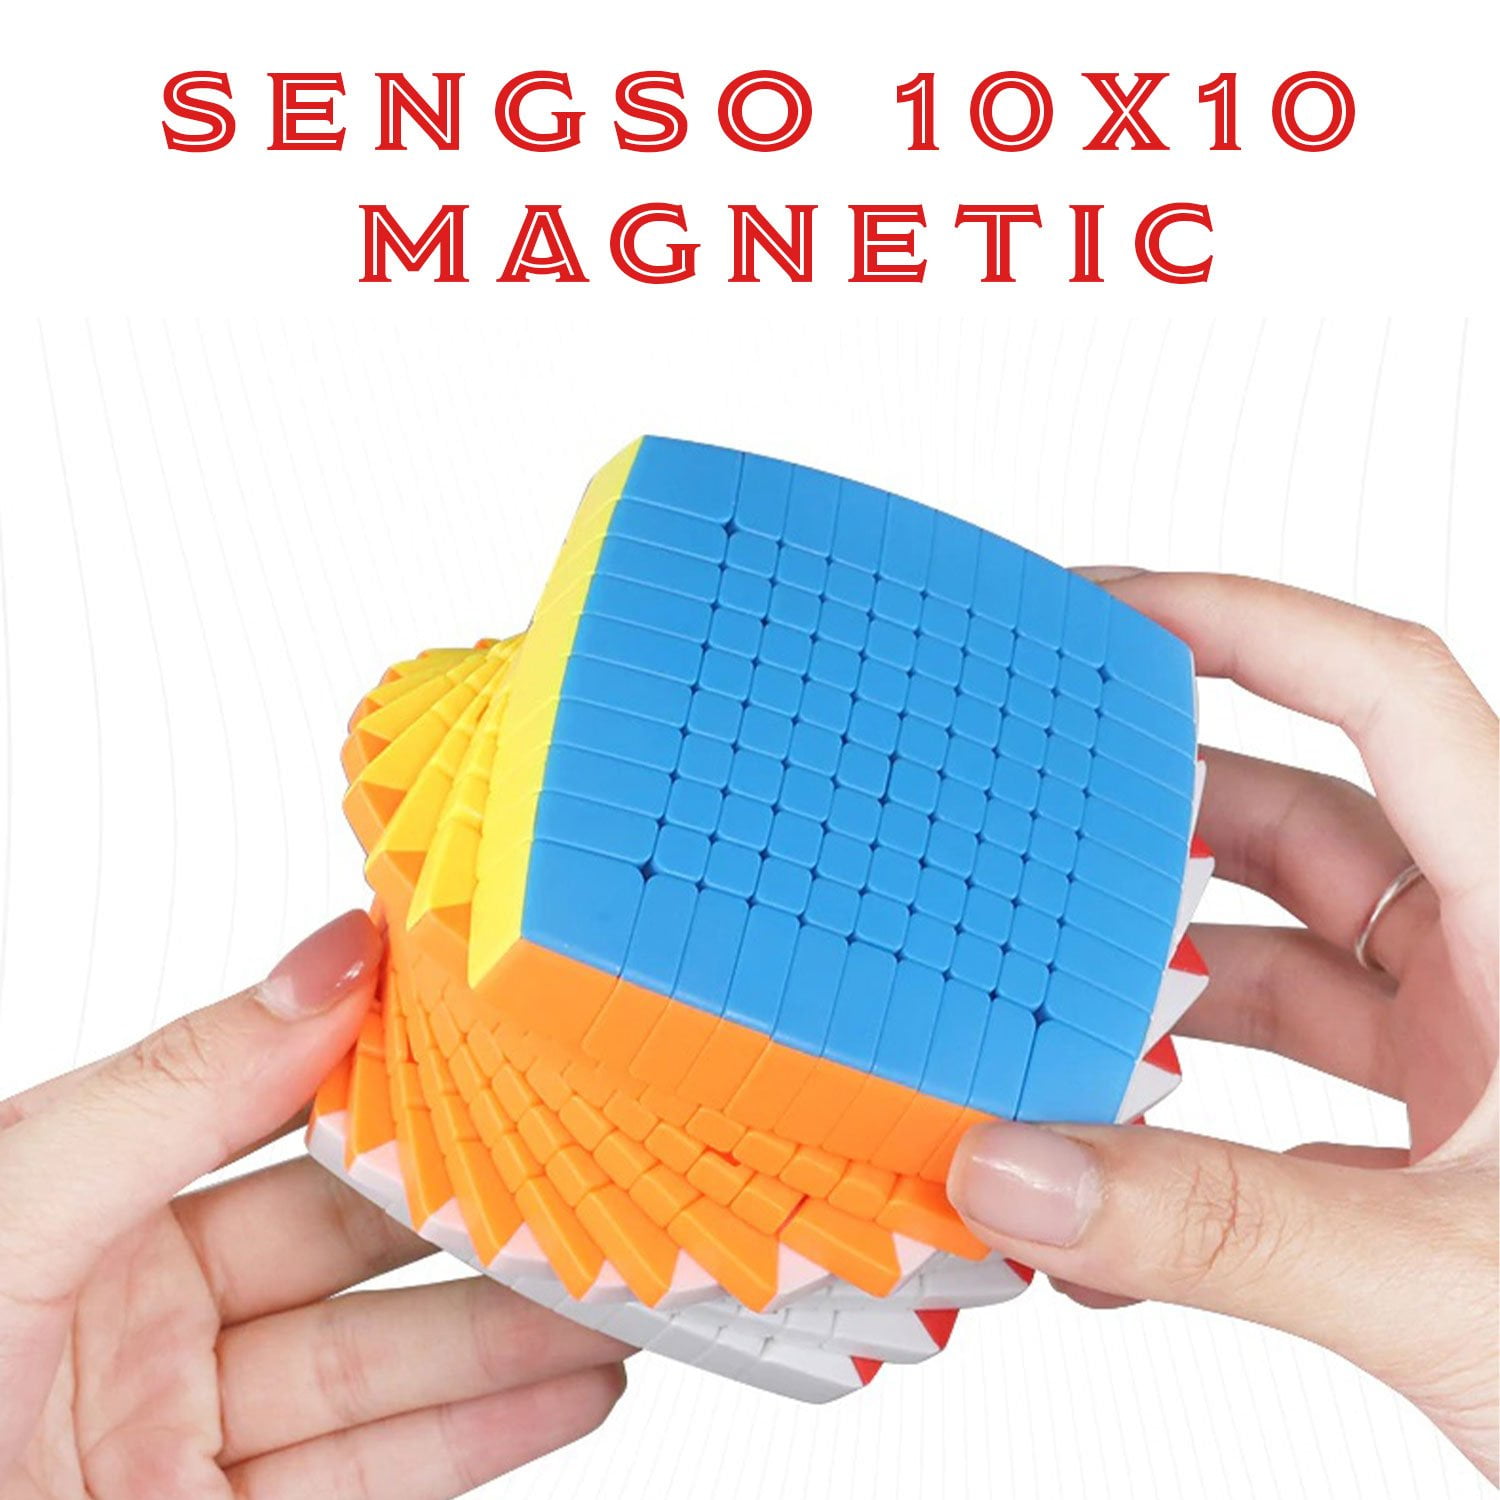 Details about   SHENGSHOU PILLOWED 10X10 MAGNETIC 